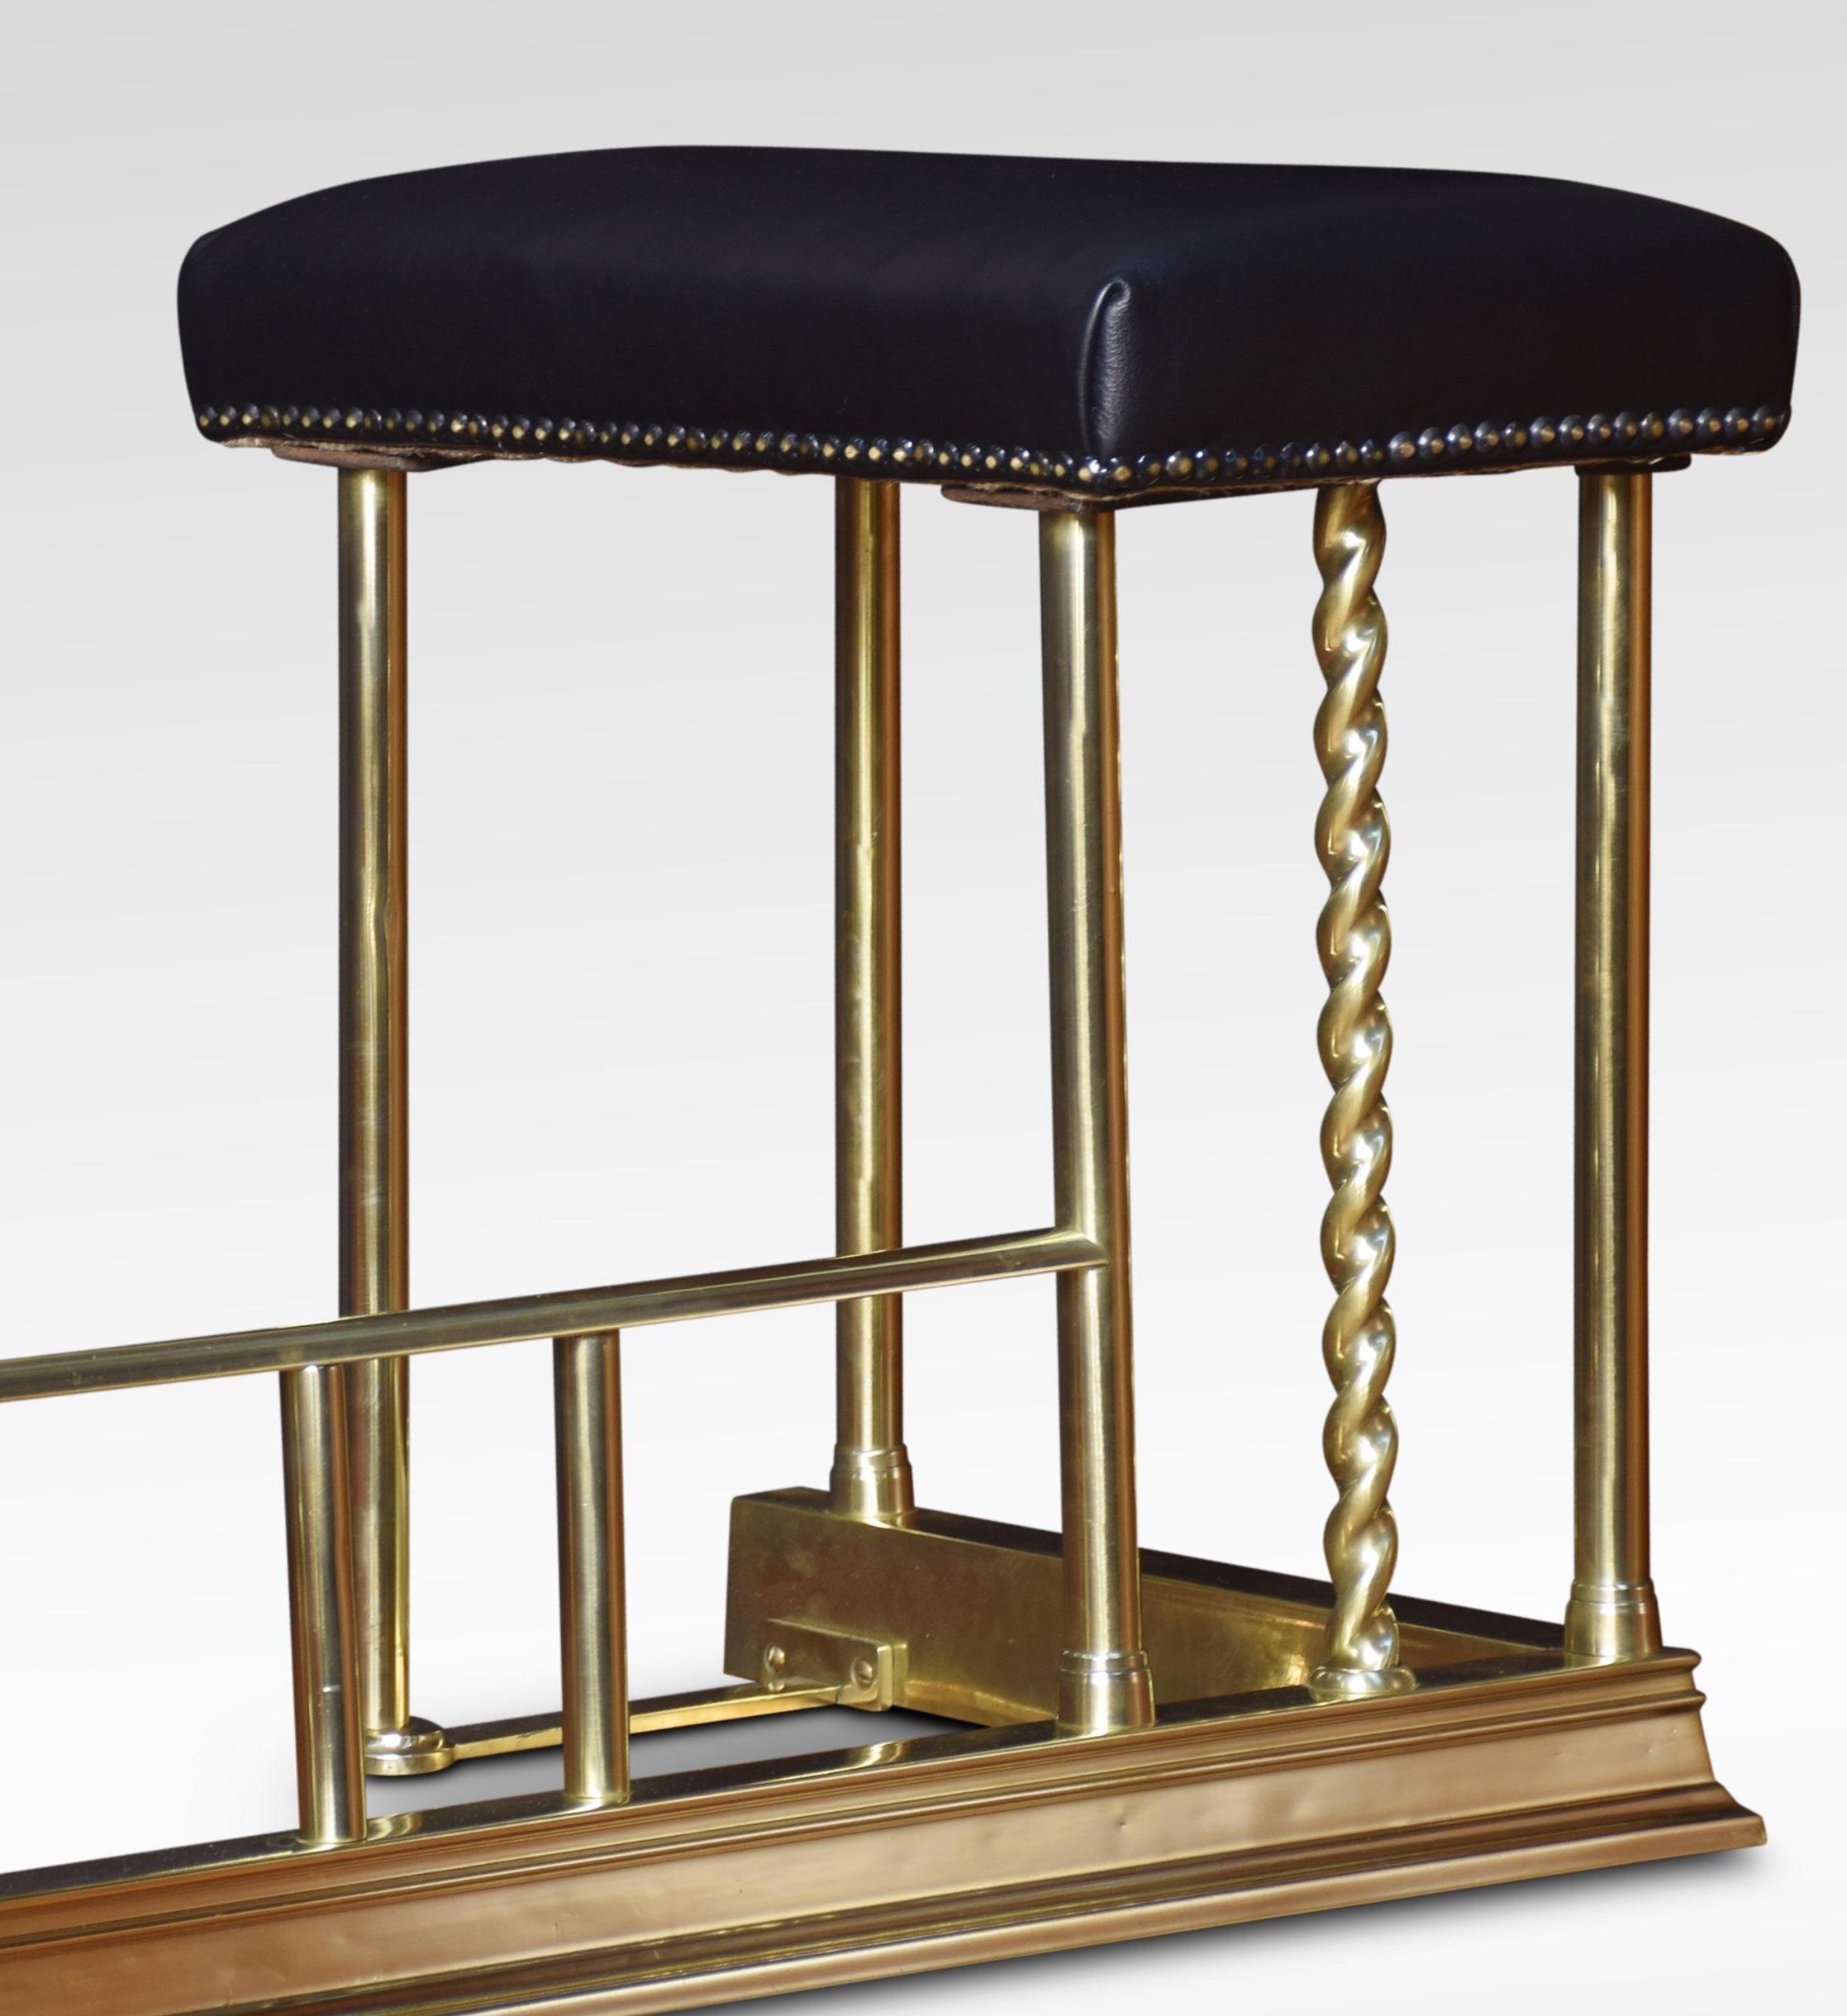 Brass club fender, with black leather stools above square supports. All raised up on a shaped plinth.
Dimensions
Height 19.5 inches
External measurements
Length 57.5 inches
Depth 17.5 inches
Internal measurements
Length 37 inches
Depth 12.5